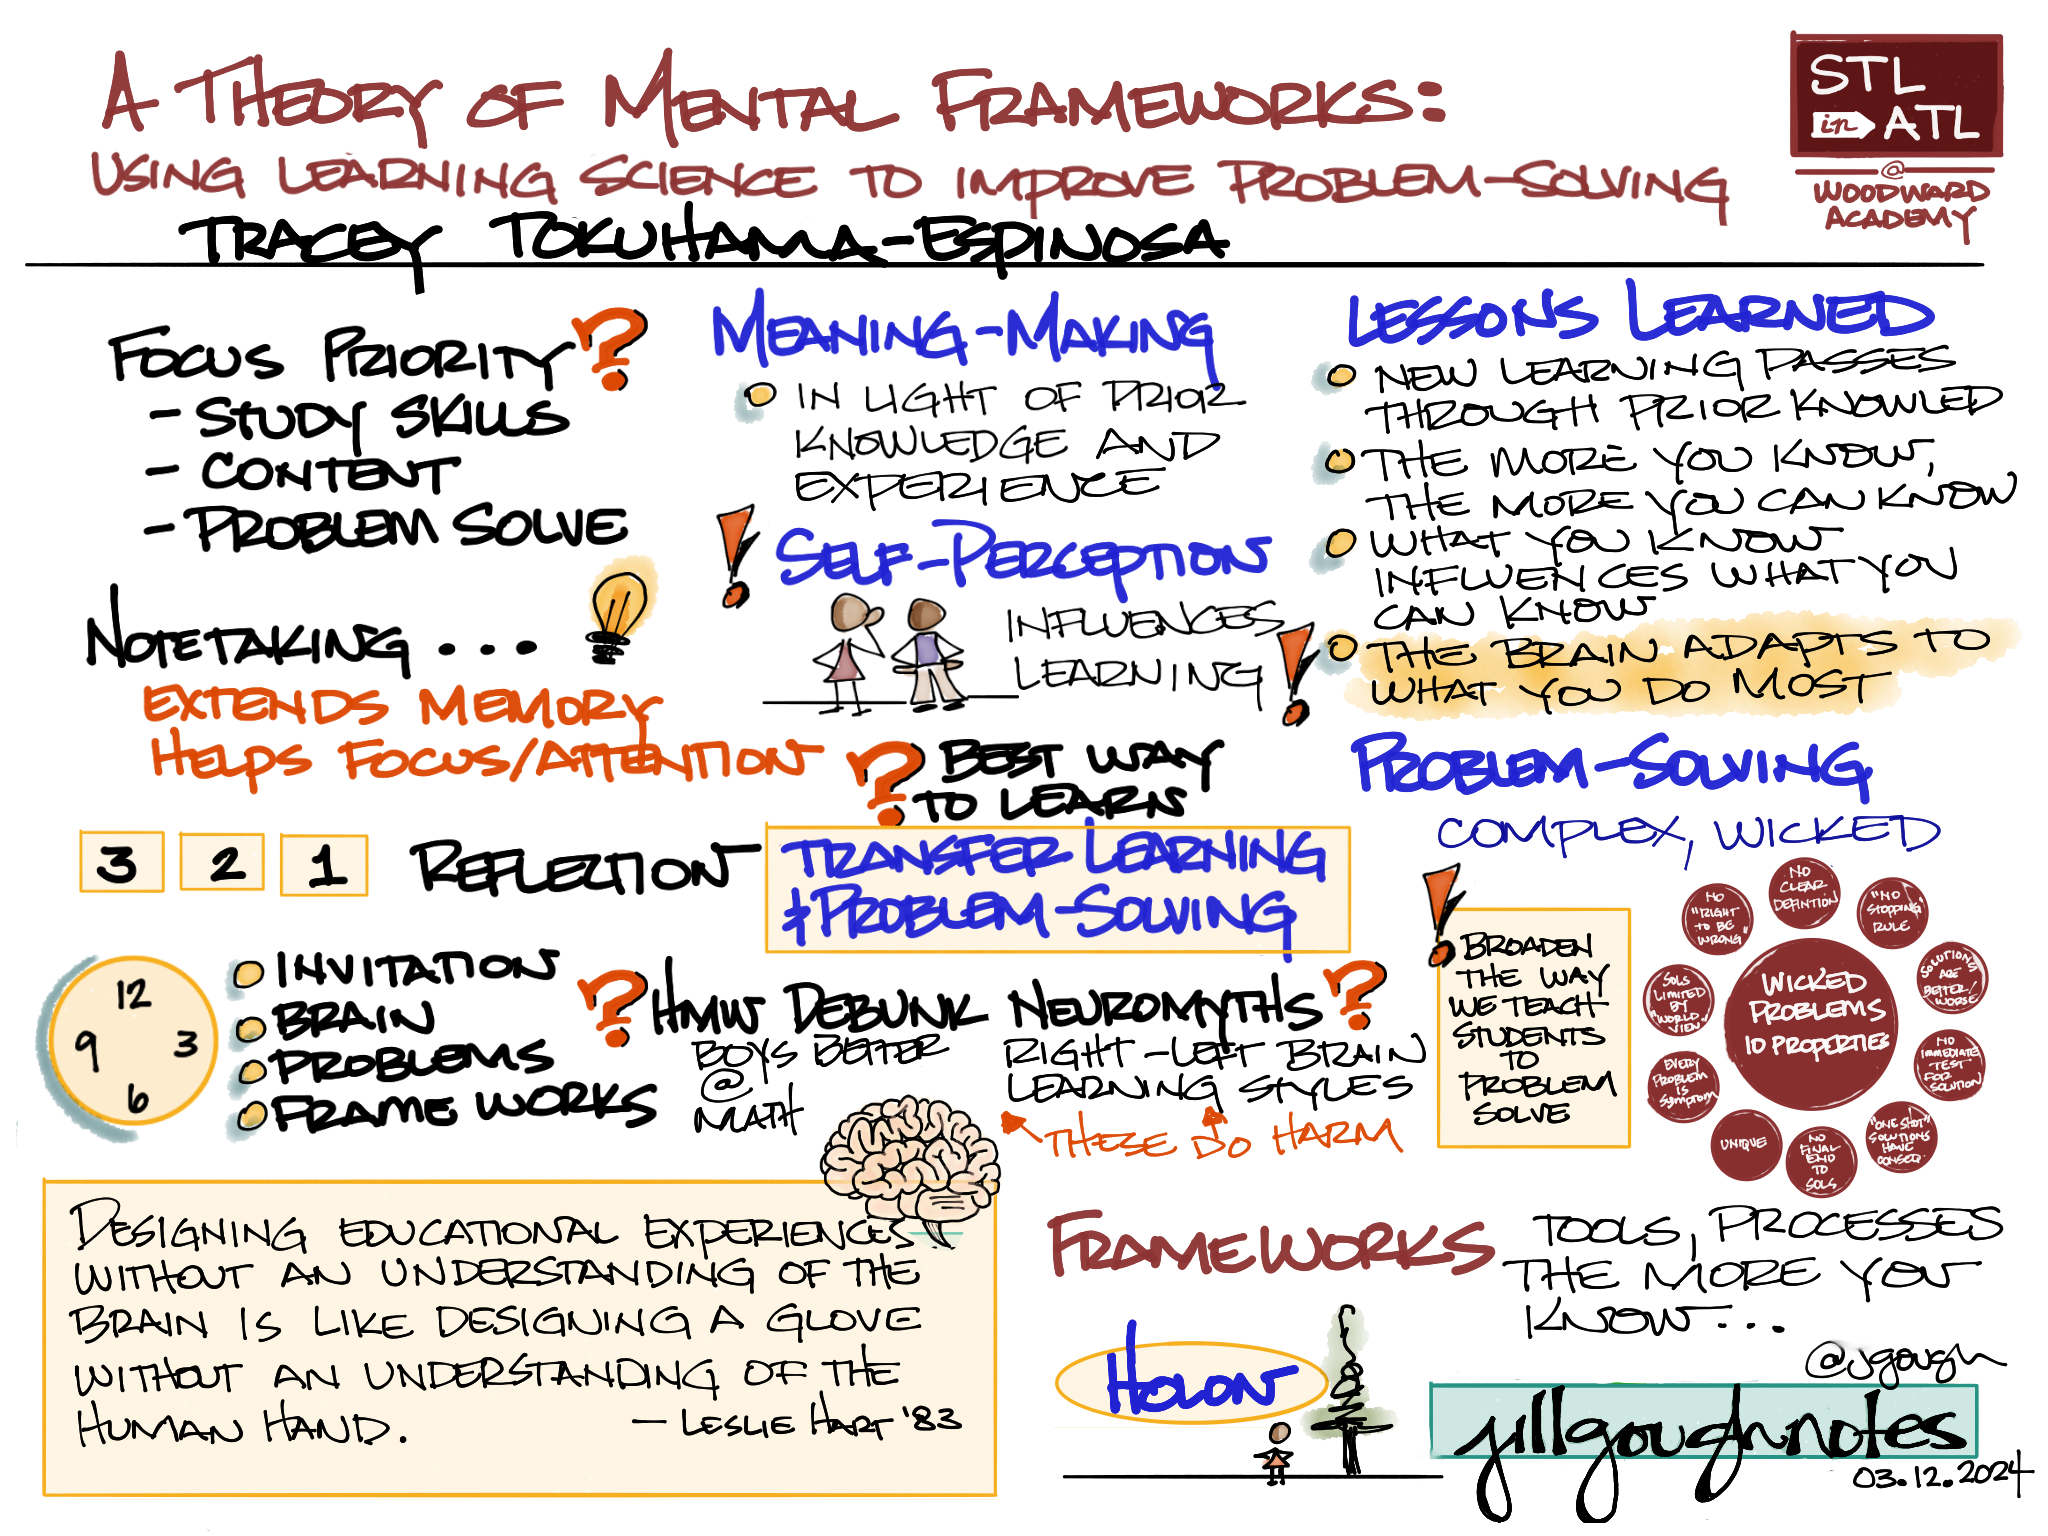 A Theory of Mental Frameworks: Using Learning Science to Improve Problem-Solving @TraceyTokuhamaEspinosa #STLinATL